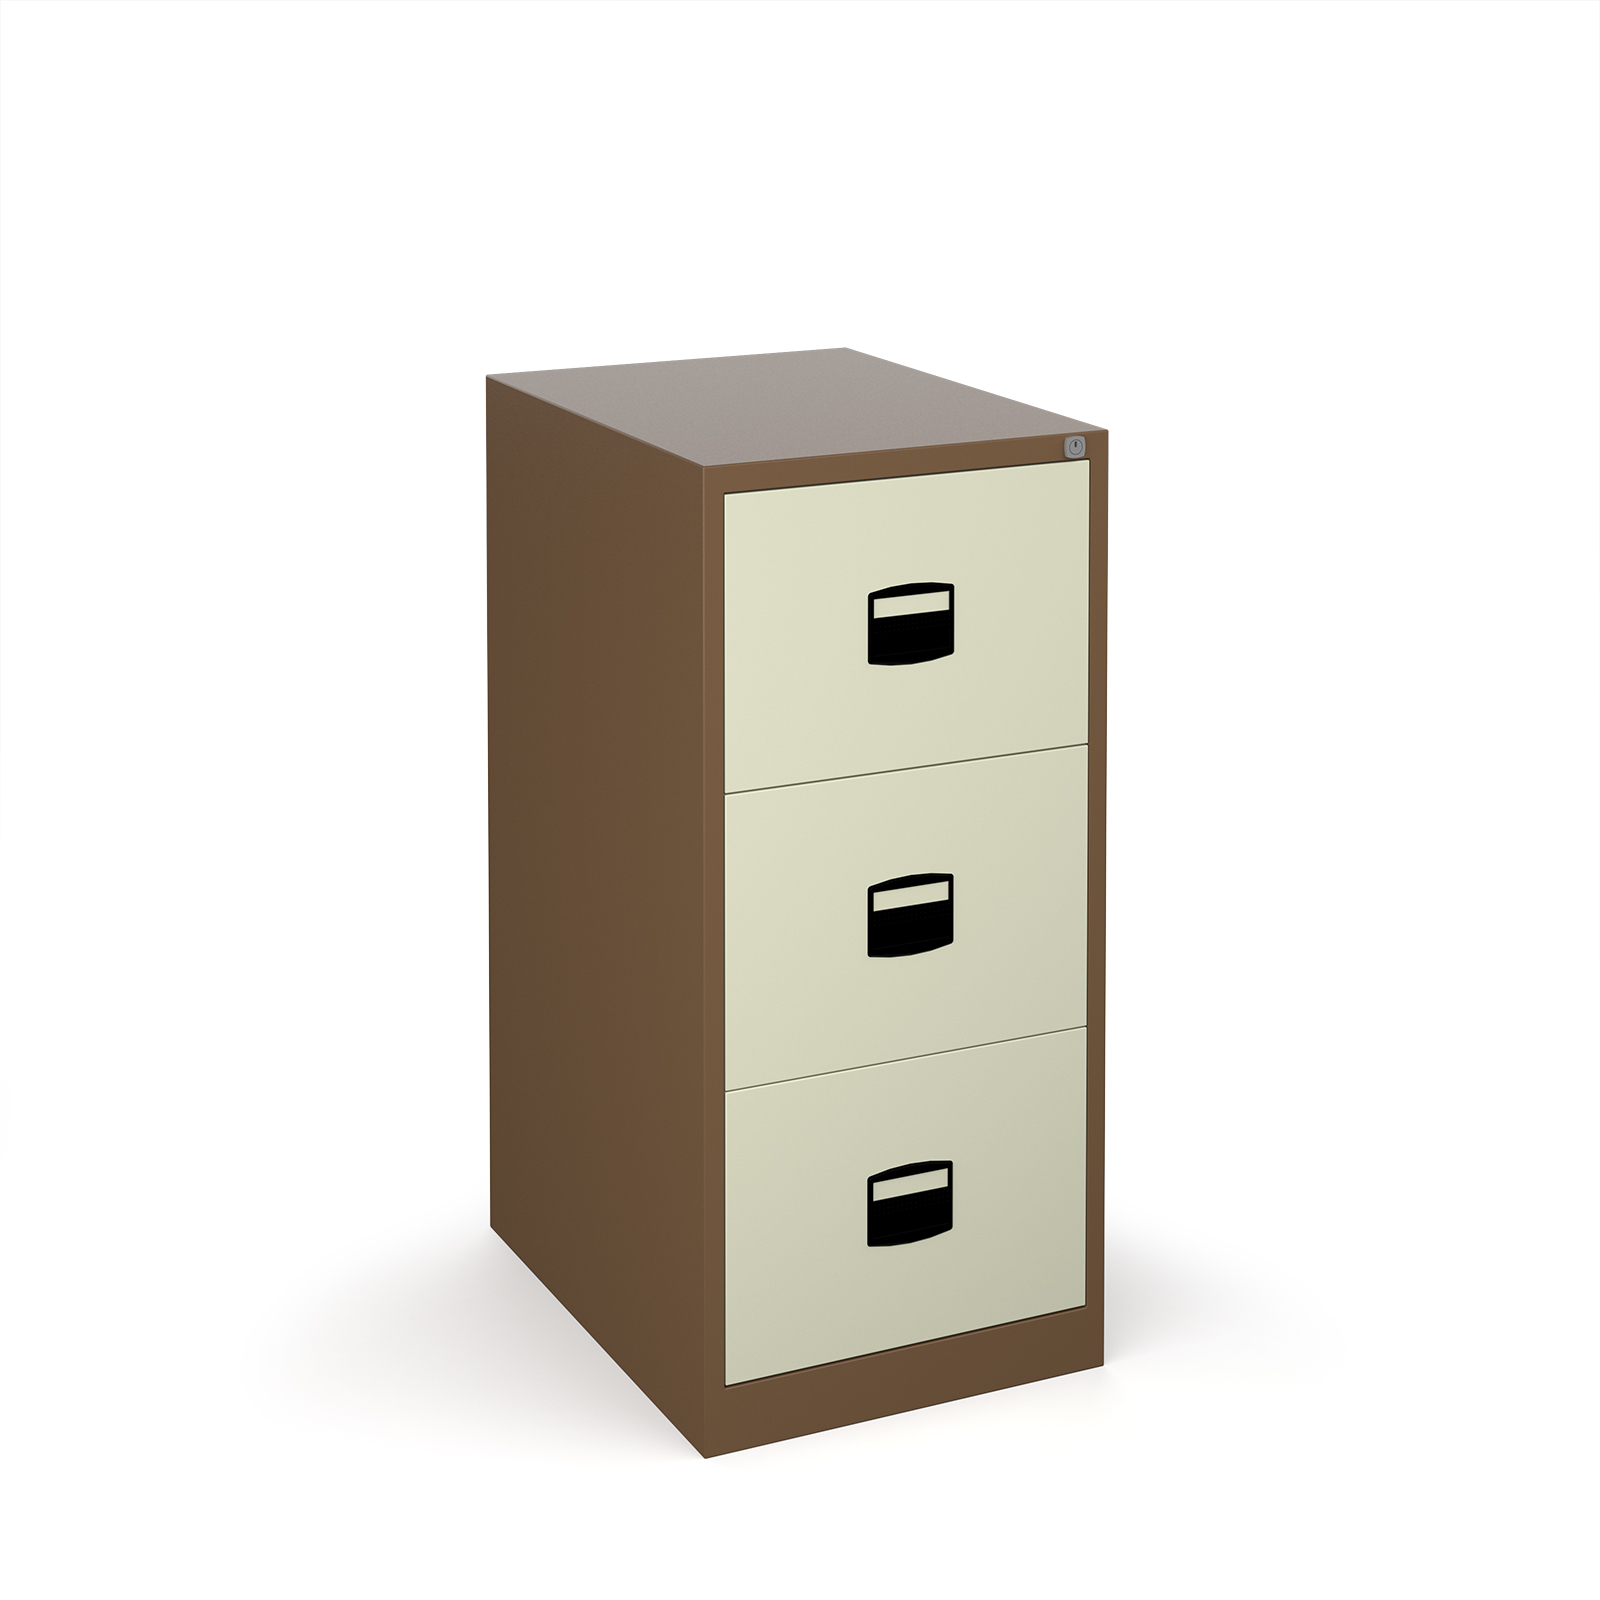 Steel Steel 3 drawer contract filing cabinet 1016mm high - coffee/cream 